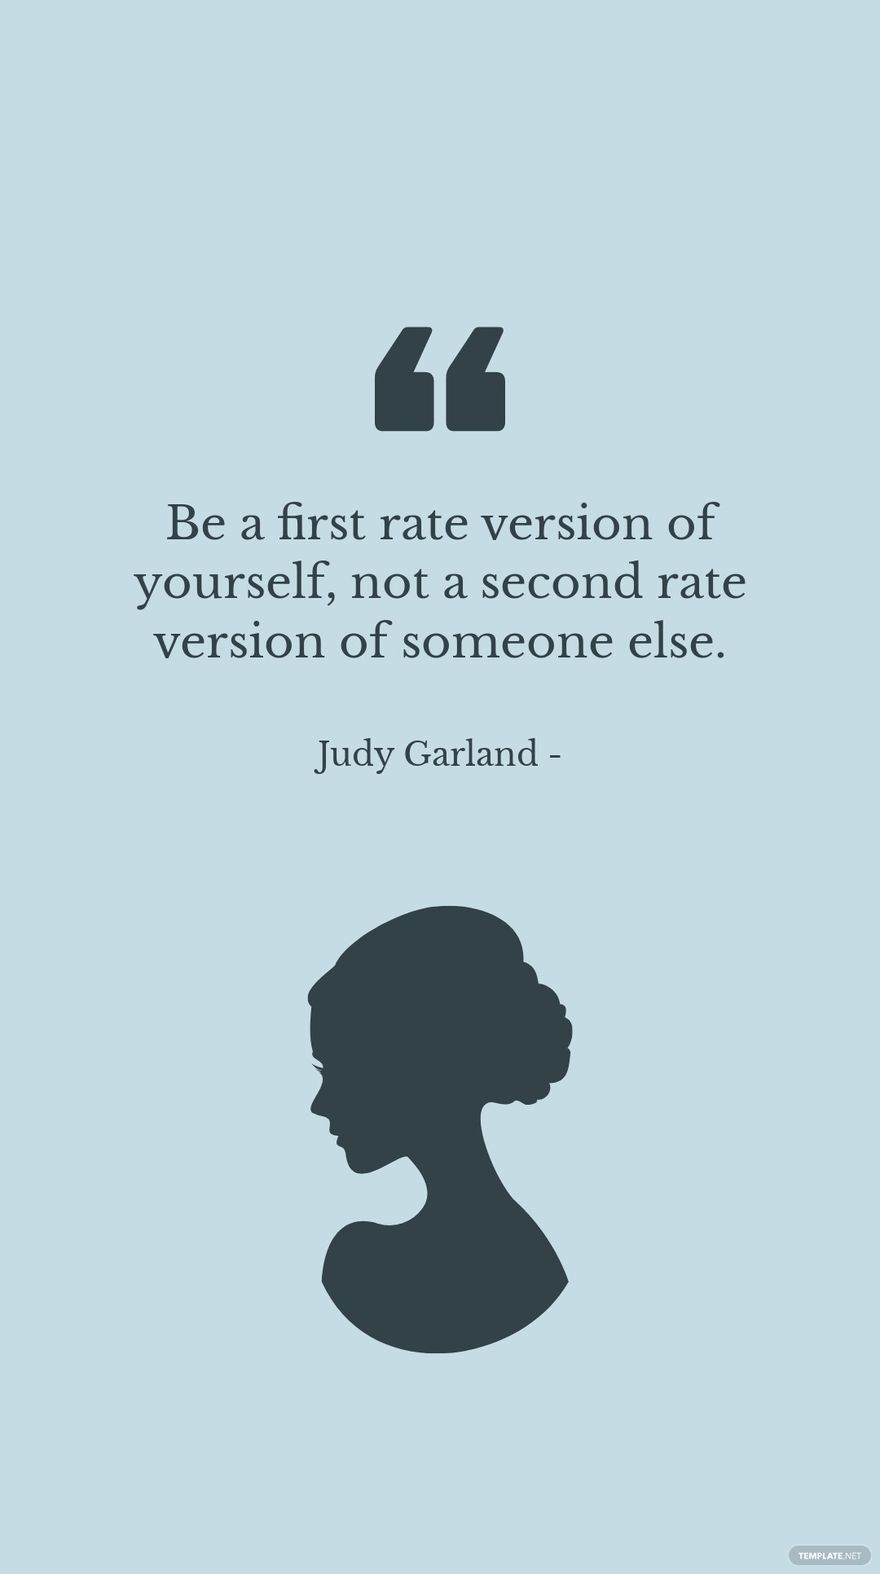 Judy Garland - Be a first rate version of yourself, not a second rate version of someone else.